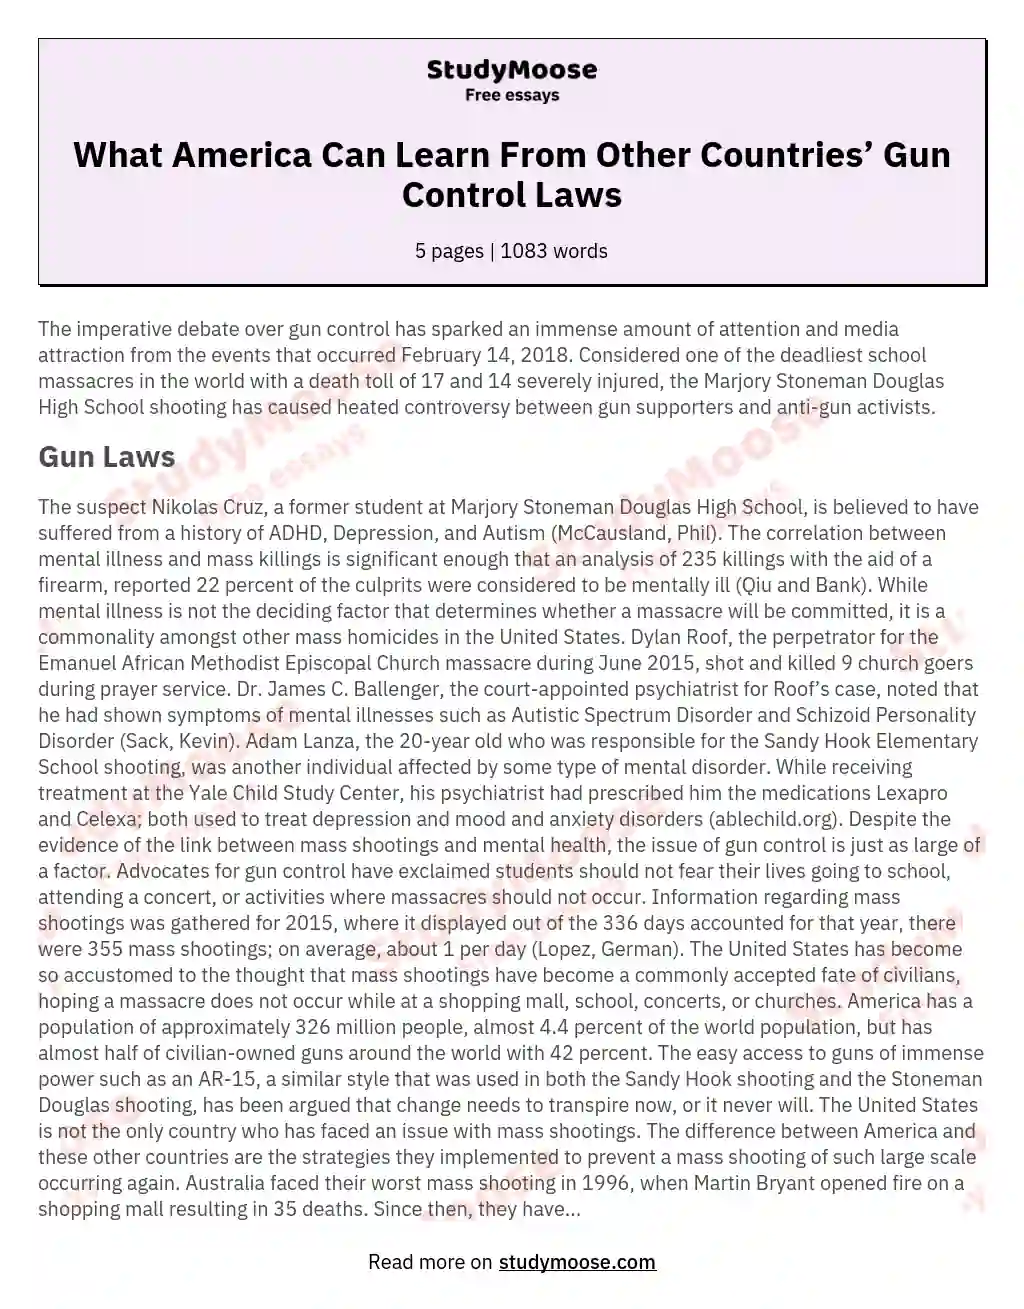 What America Can Learn From Other Countries’ Gun Control Laws